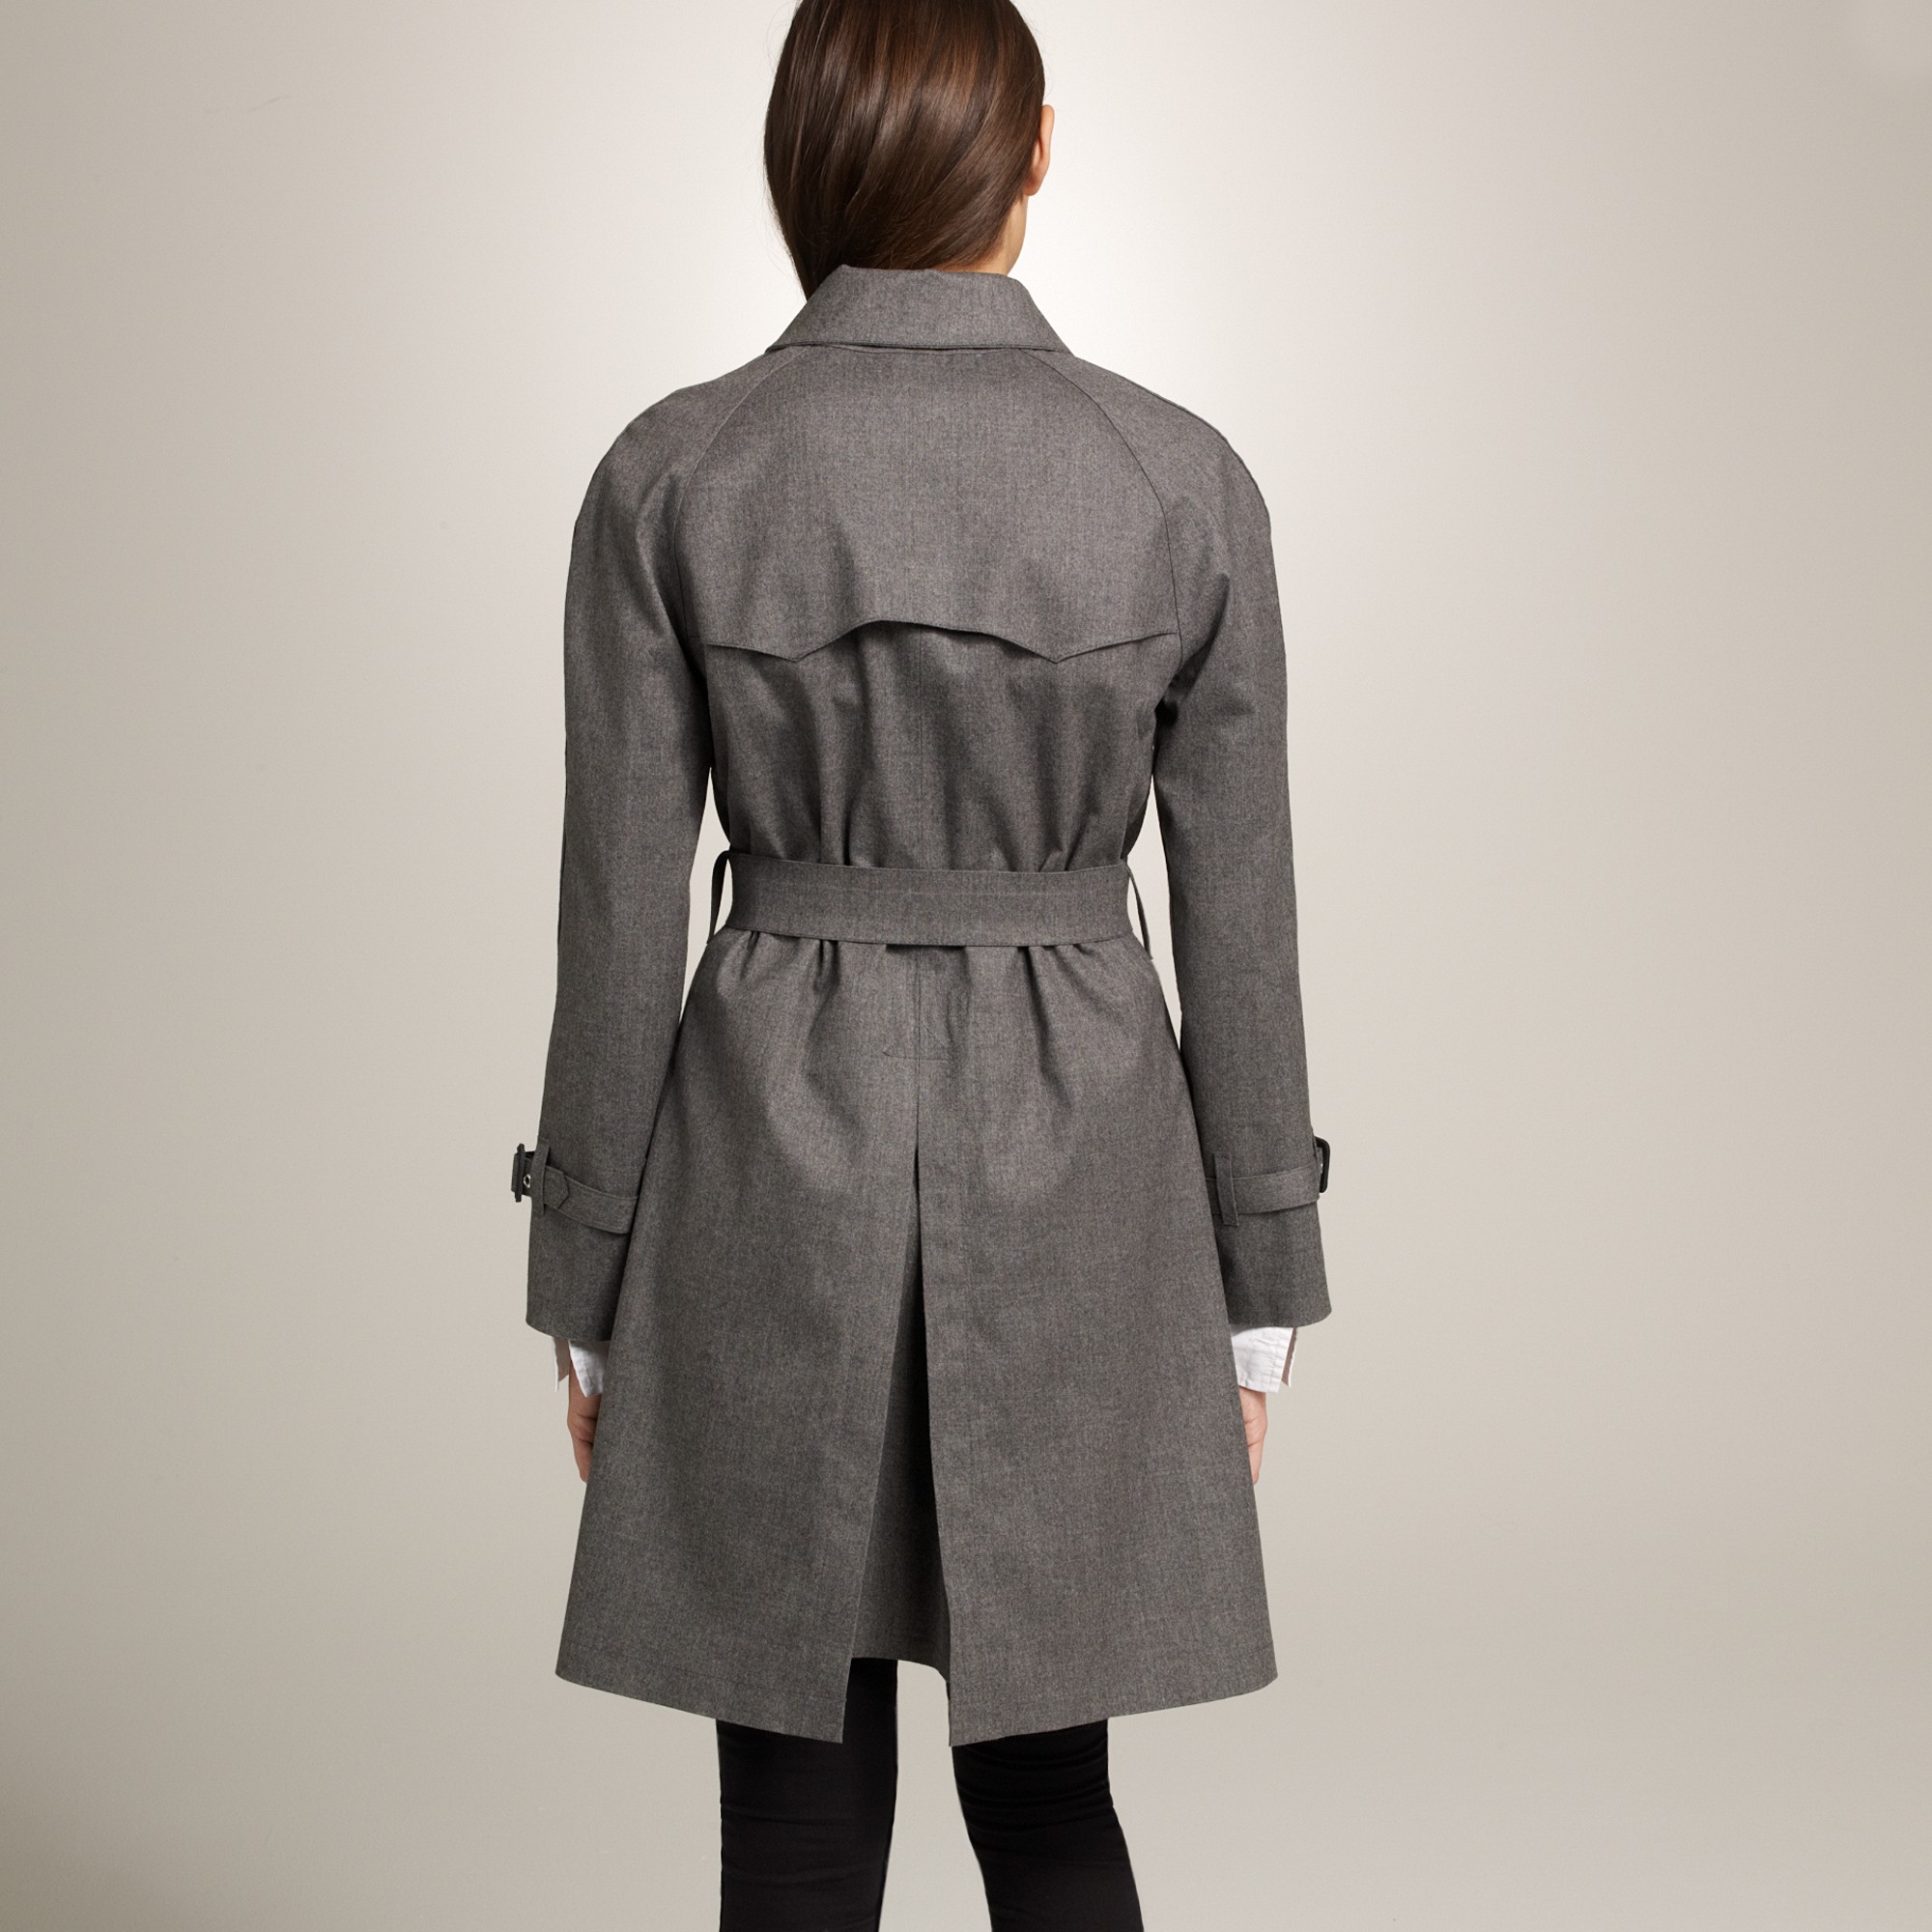 J.crew Mackintosh® Dollar Trench Coat in Bonded Wool Flannel in Gray | Lyst